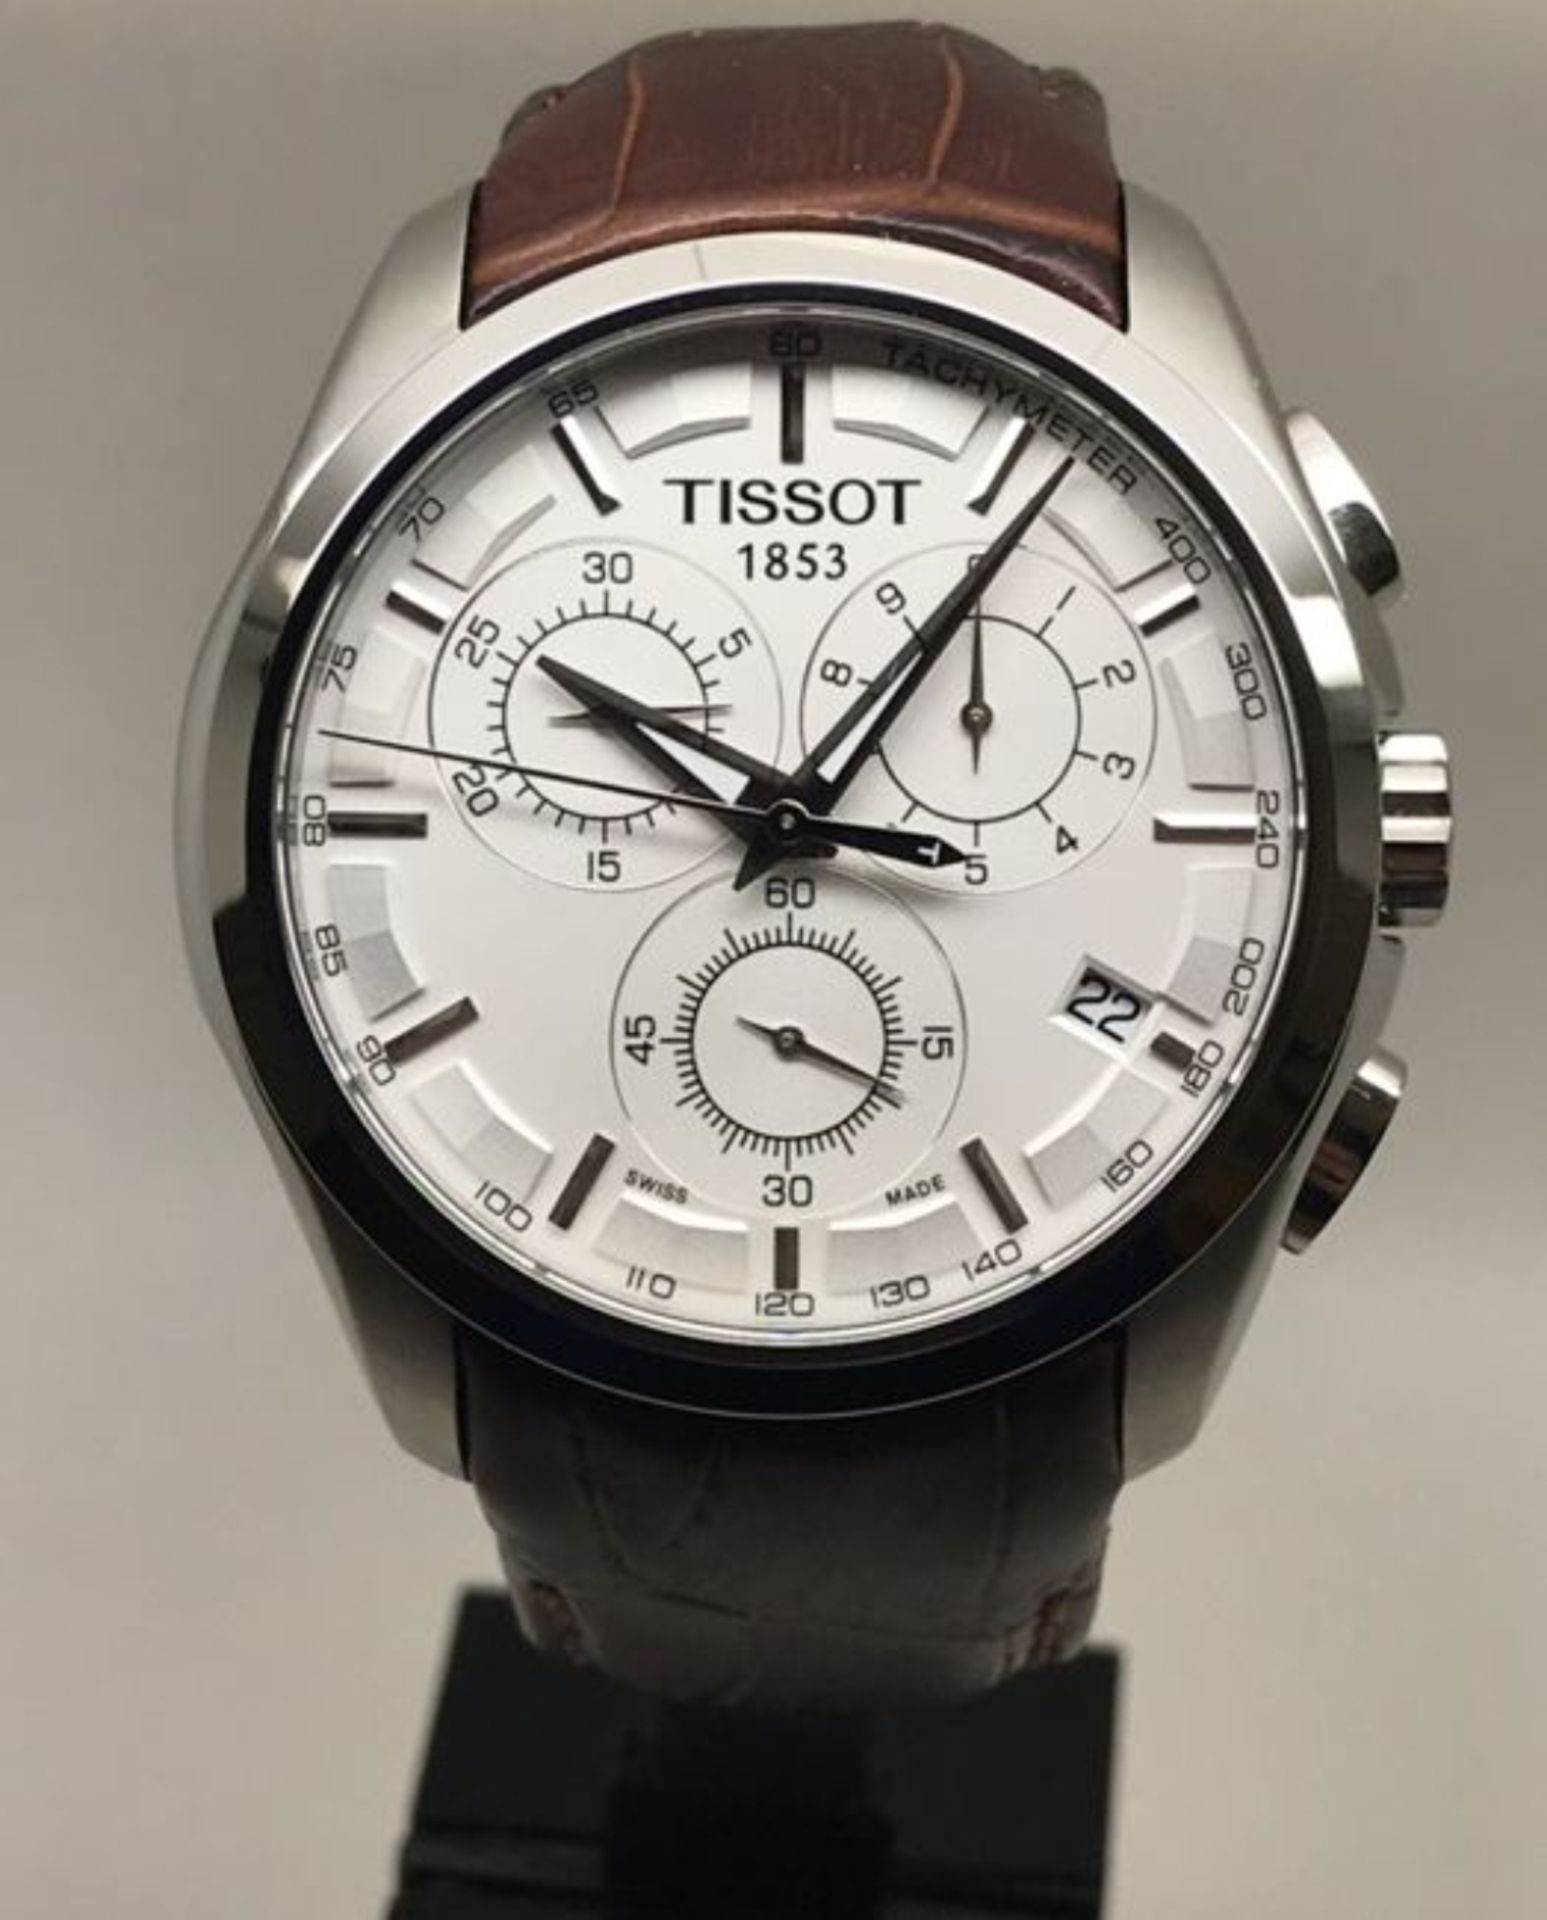 Tissot - Couturier Chronograph - T035.617.16.031.00 - Men's Watch - Image 8 of 10